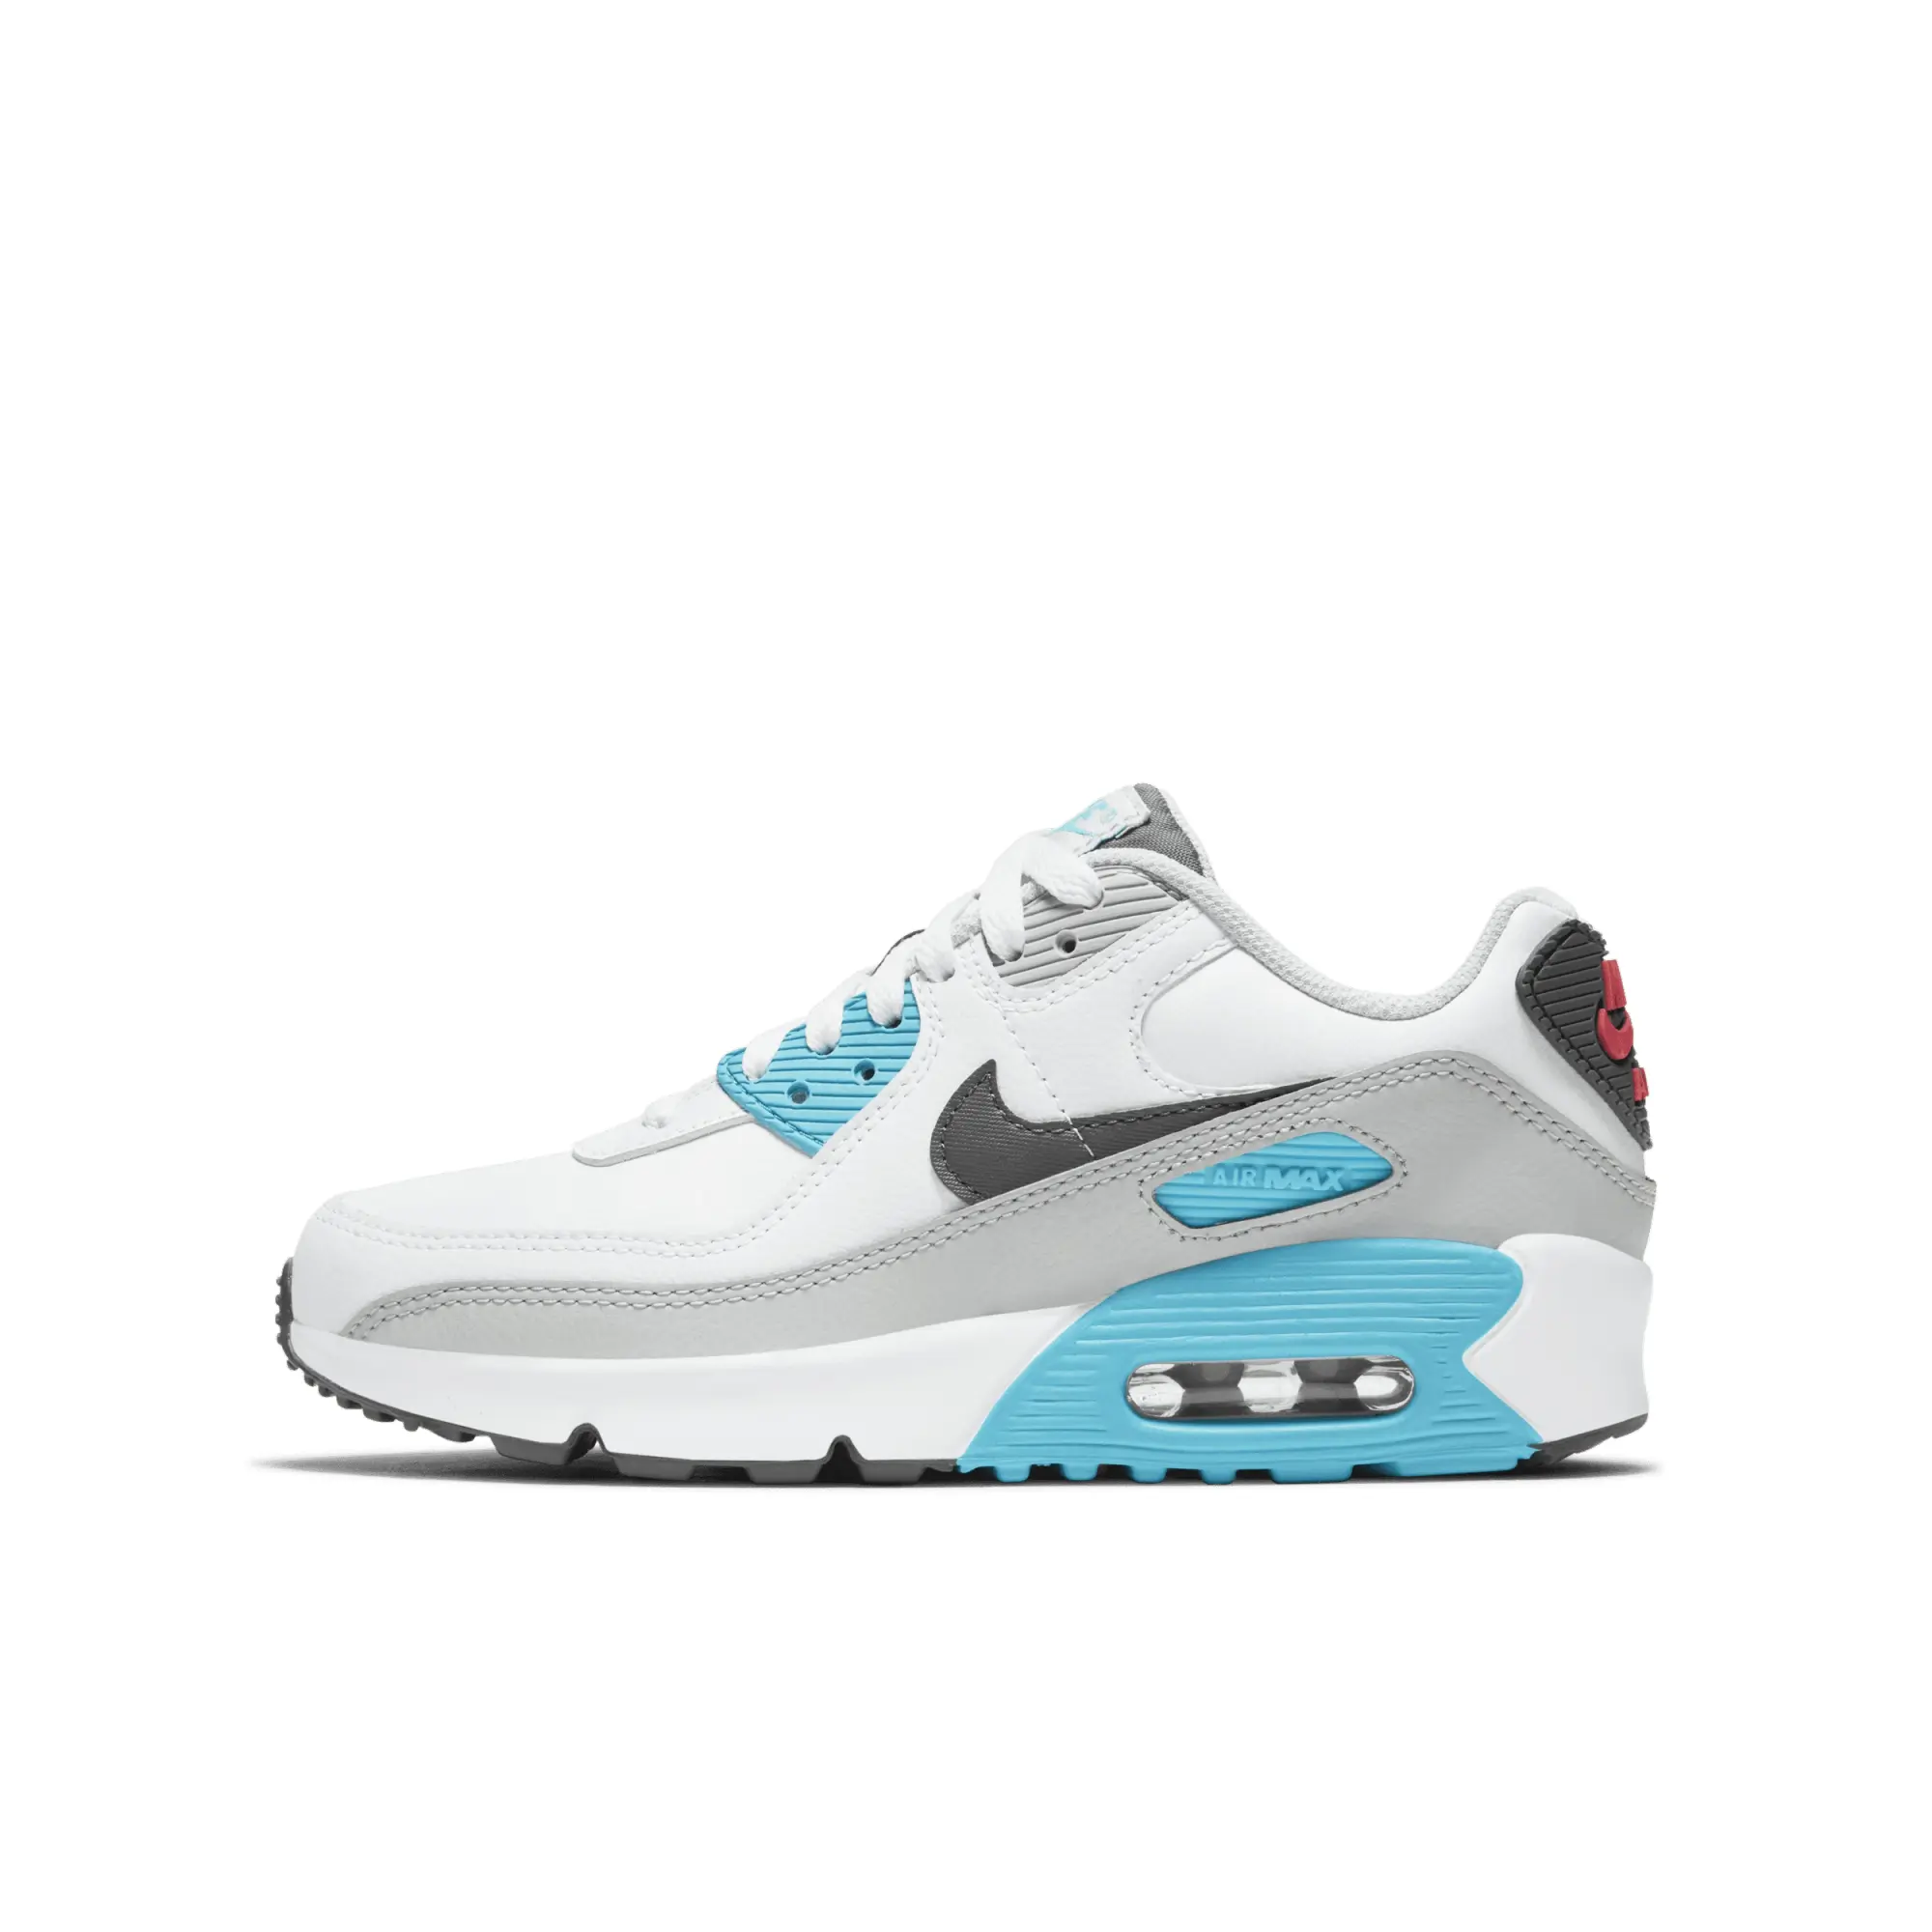 Nike white & blue air max 90 ltr Youth Trainers